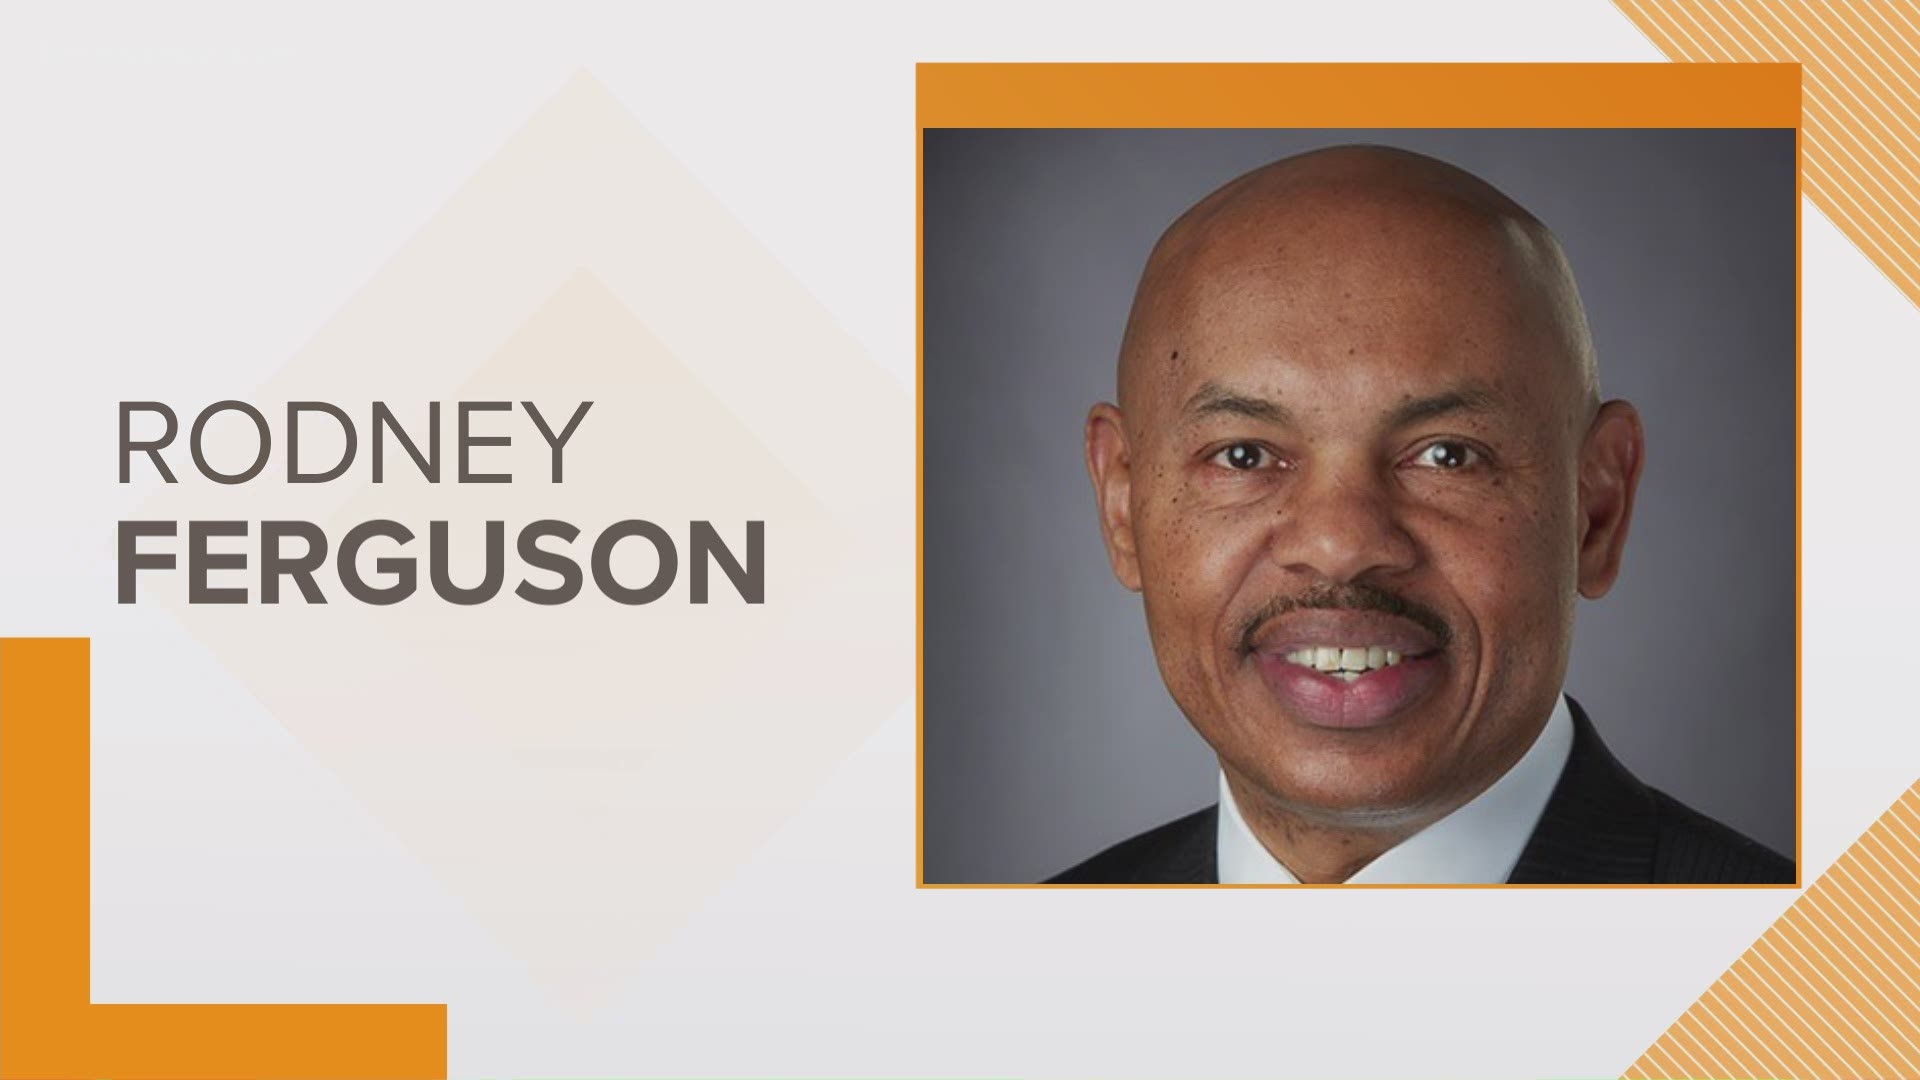 Rodney Ferguson will serve in a senior leadership position for the Norfolk Resort & Casino as well as gaming and resort operations for the Authority generally.